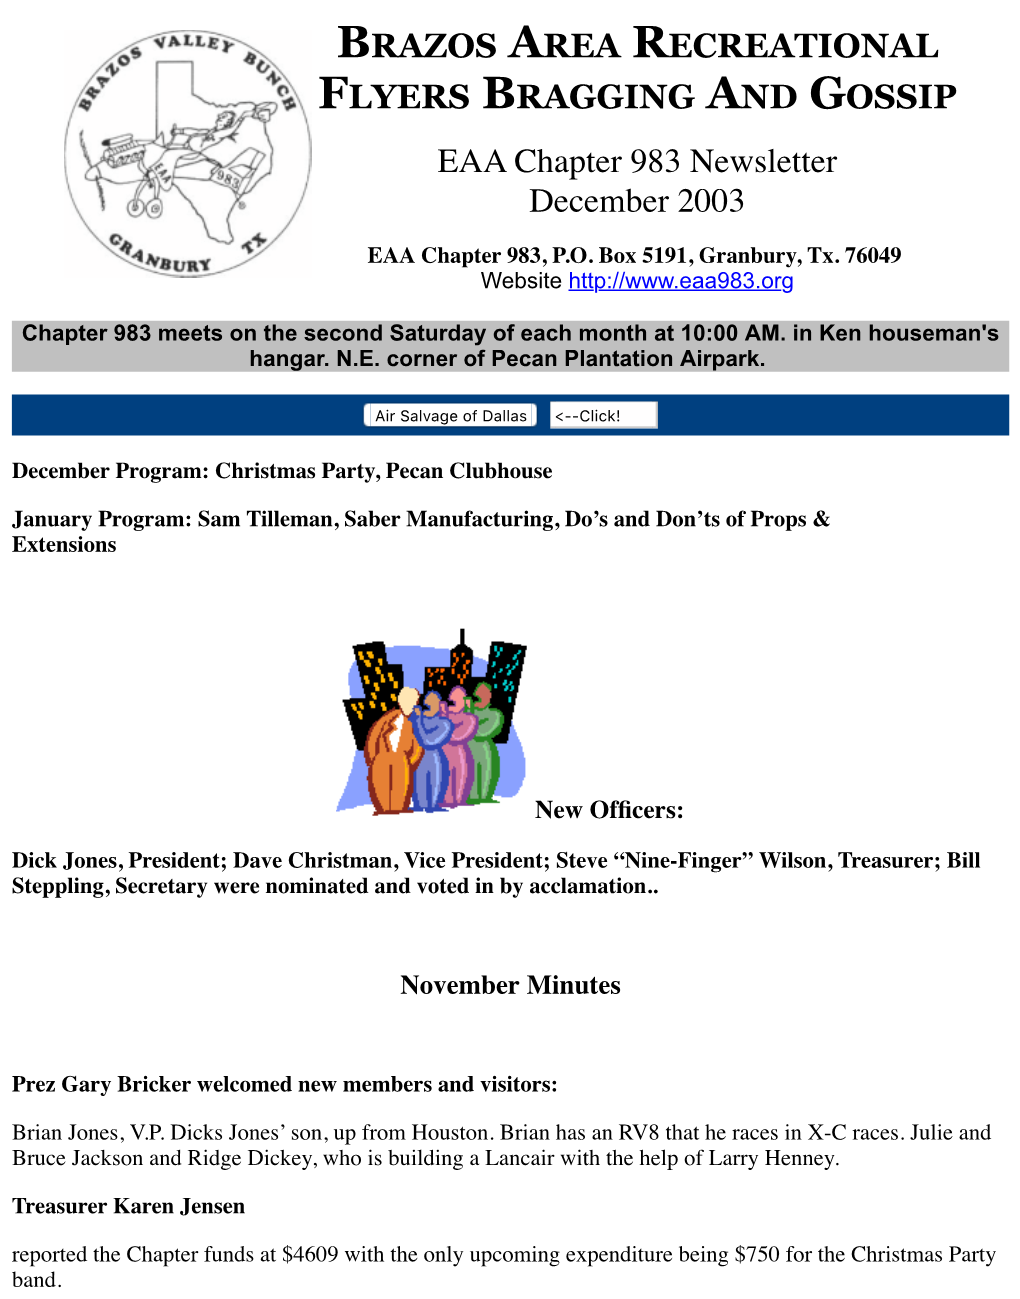 BRAZOS AREA RECREATIONAL FLYERS BRAGGING and GOSSIP EAA Chapter 983 Newsletter December 2003